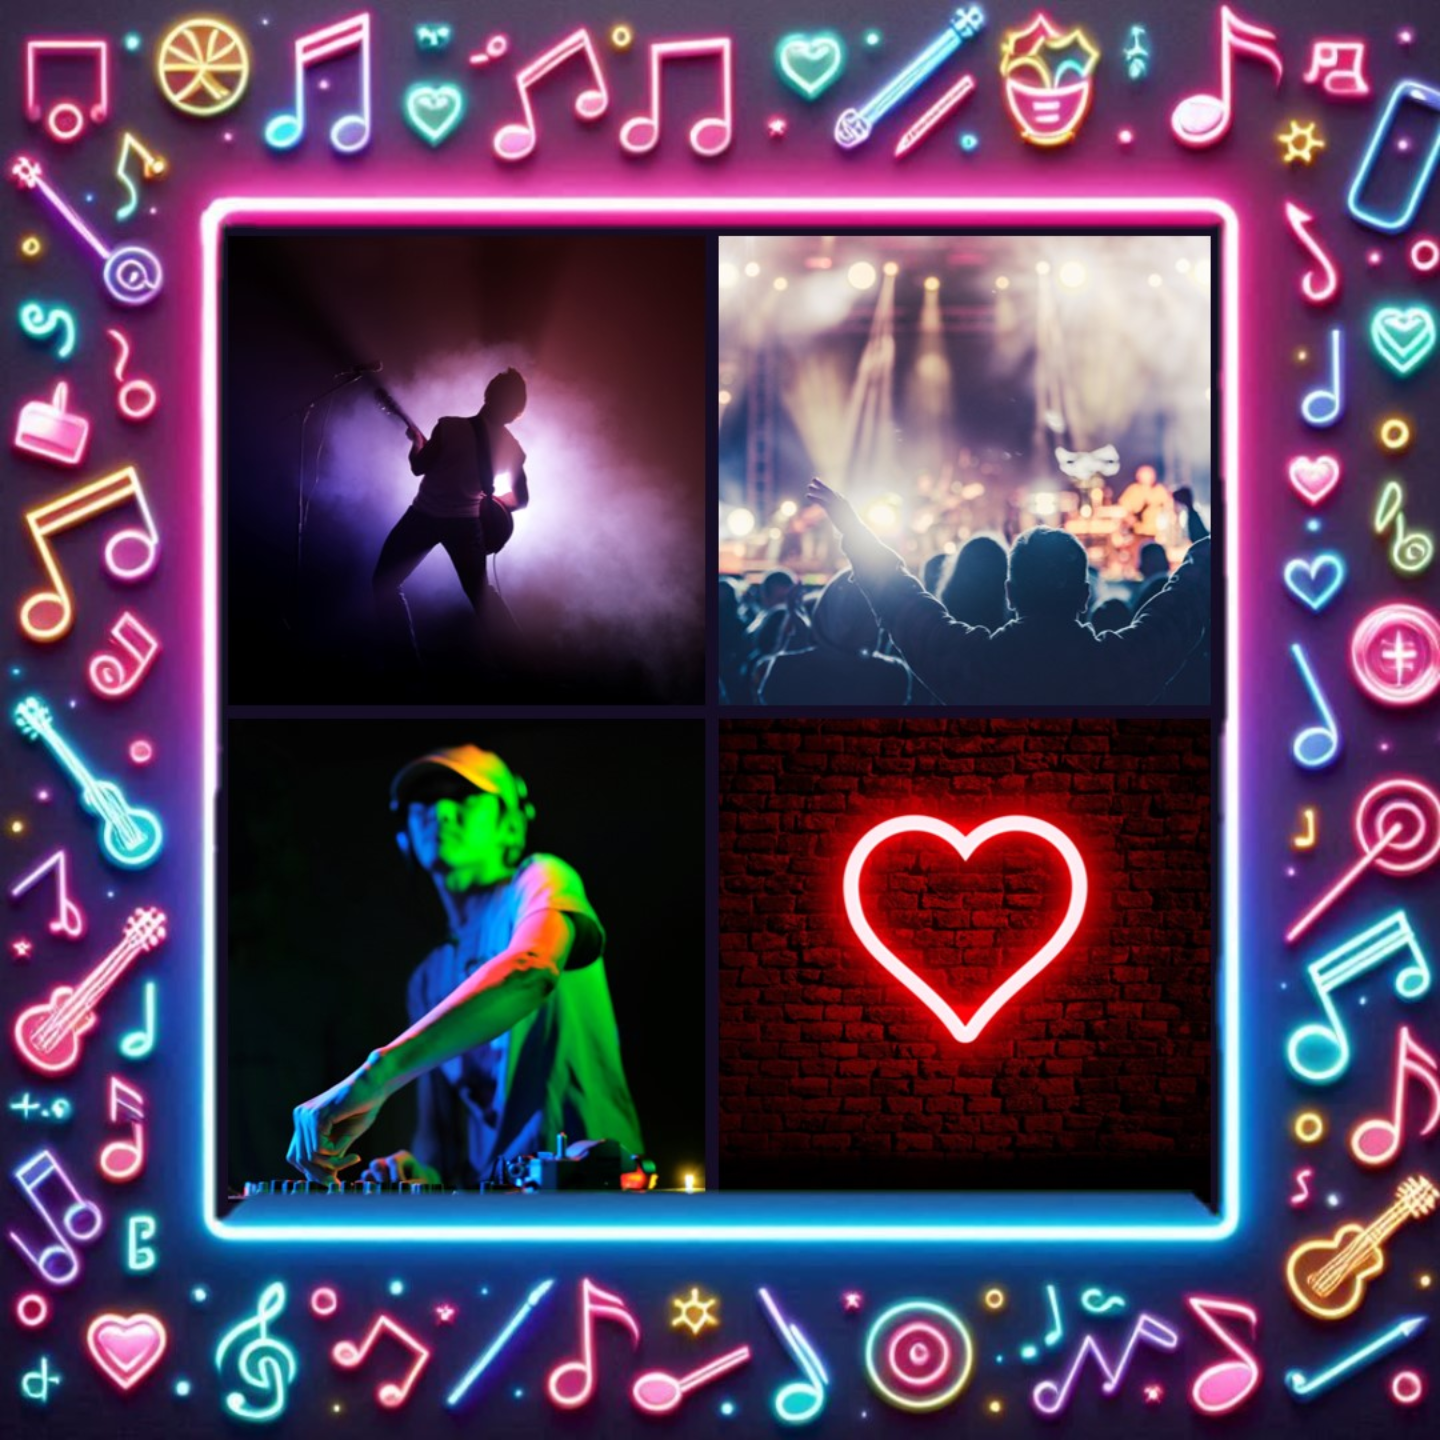 Neon frame and collage showcasing concert photos